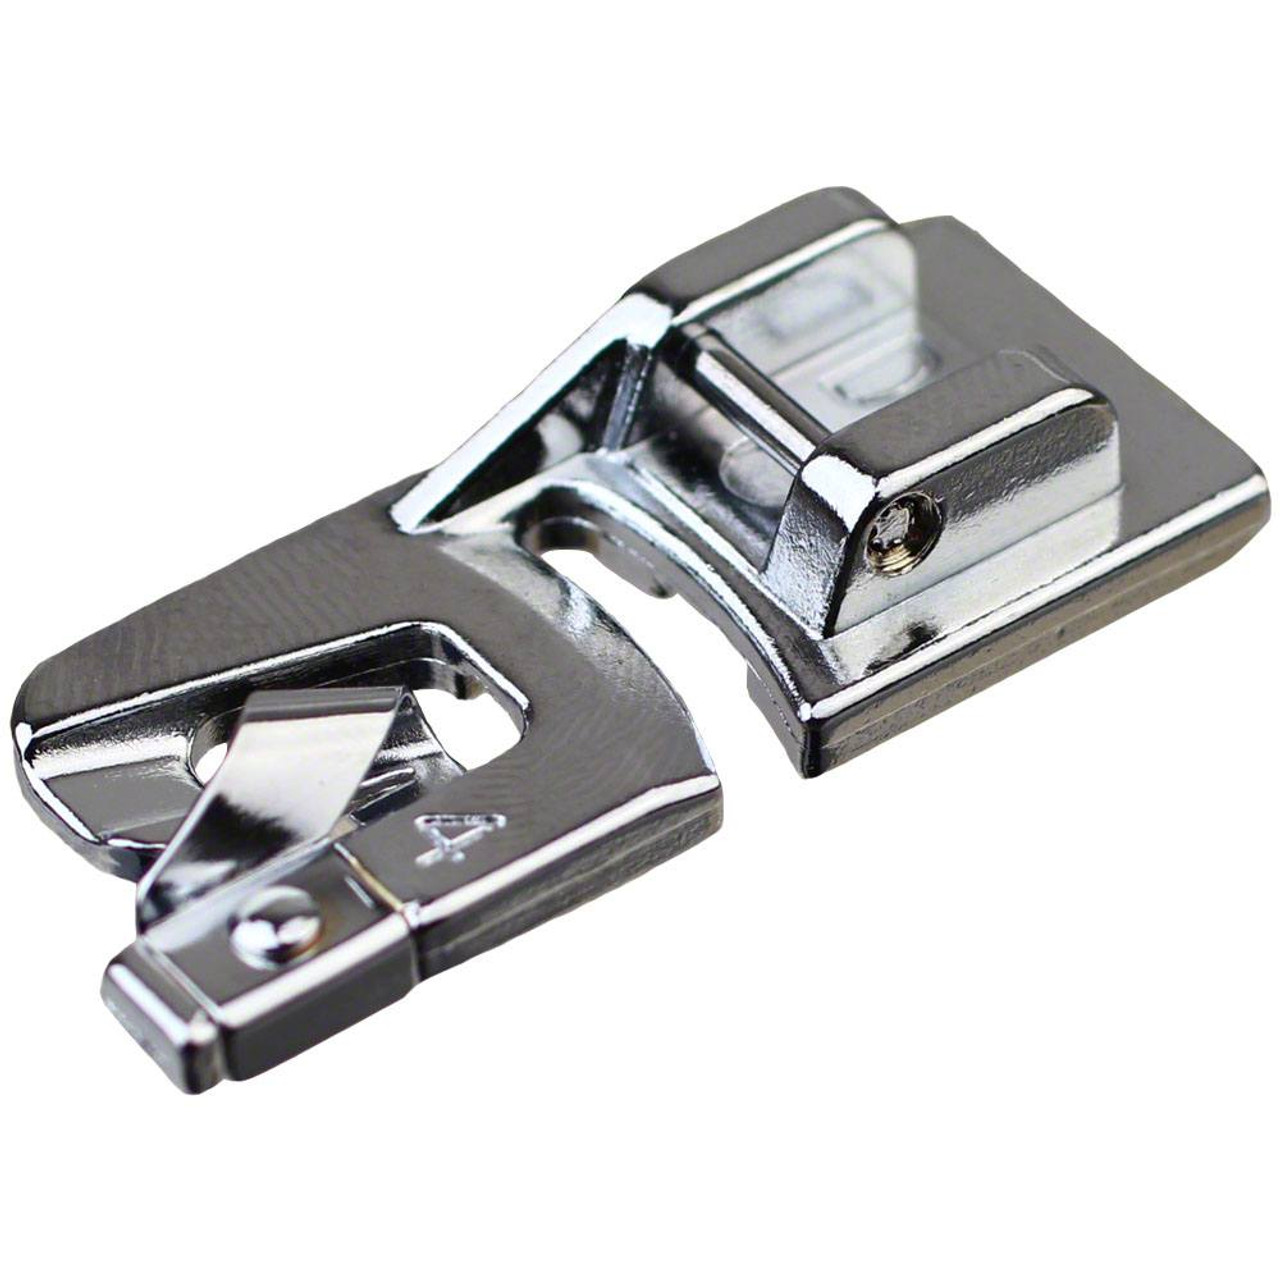 Rolled Hem Presser Foot Set For Singer Janome Sewing Domestic Machine Part  Sewing Machine Sewing Tools Accessory Stitcher - Price history & Review, AliExpress Seller - enjoybuy Store